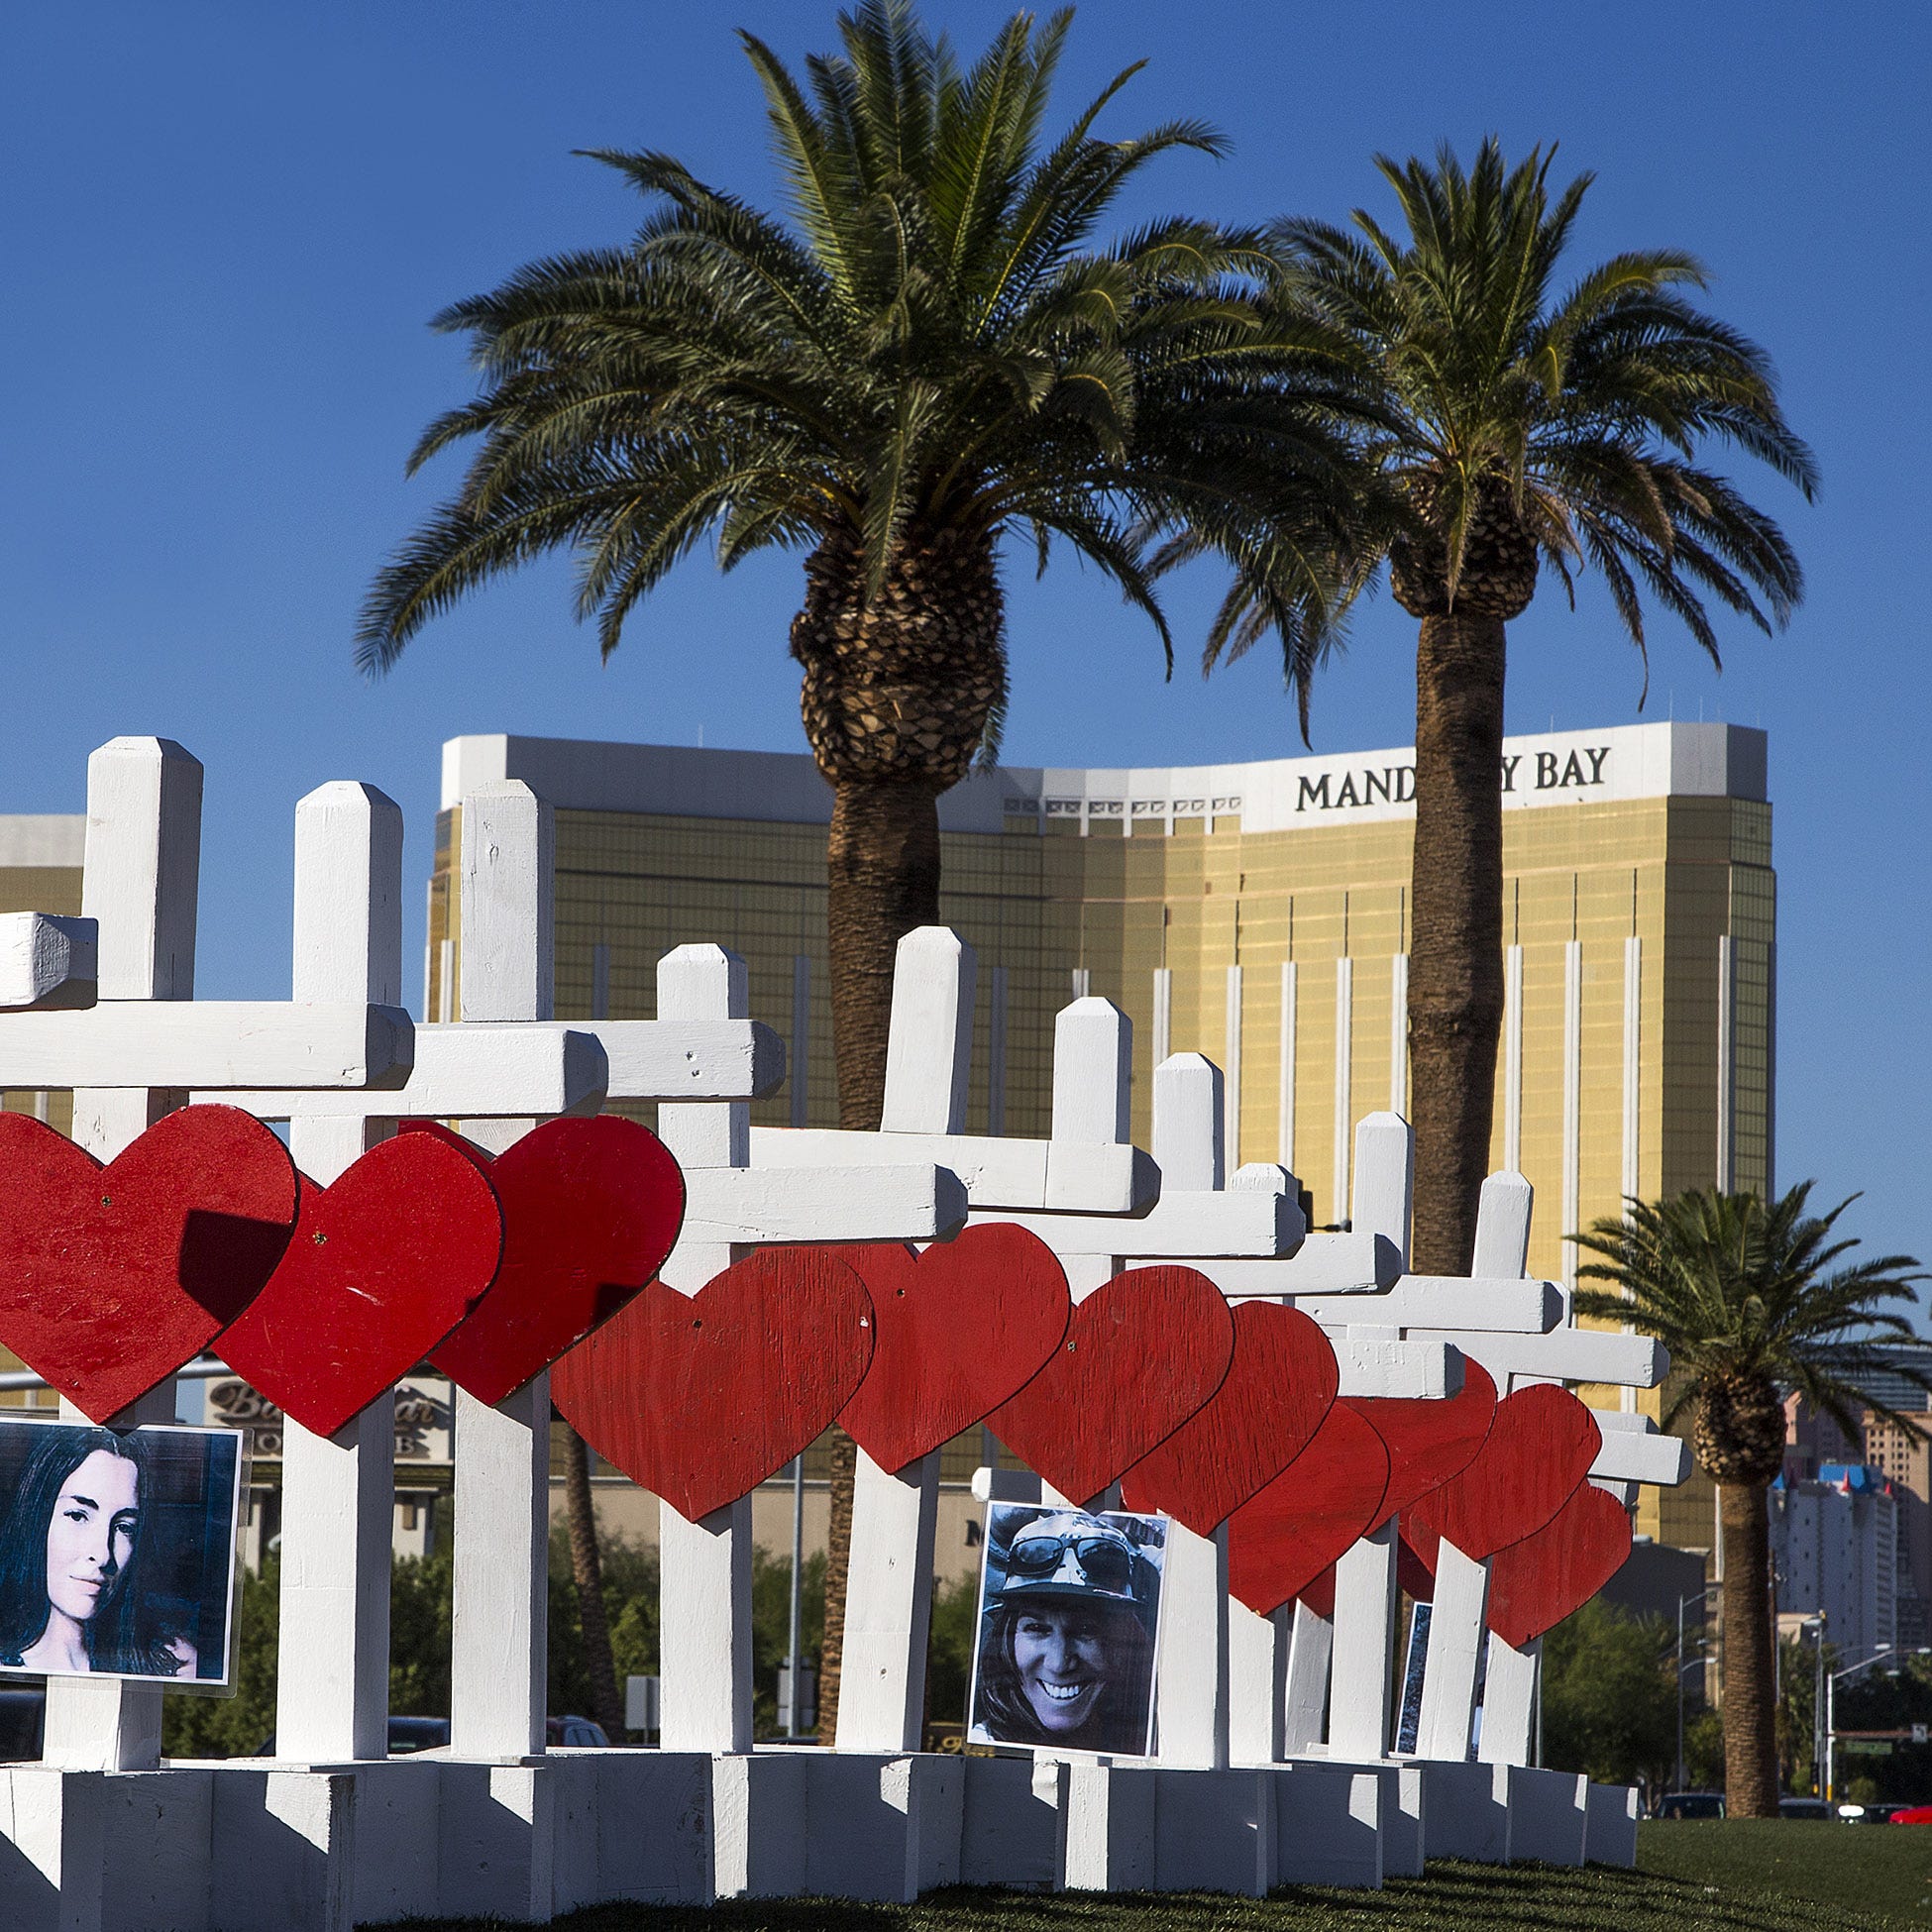 A memorial to the victims of the shooting is seen near the Mandalay Bay Hotel on Oct. 5, 2017.